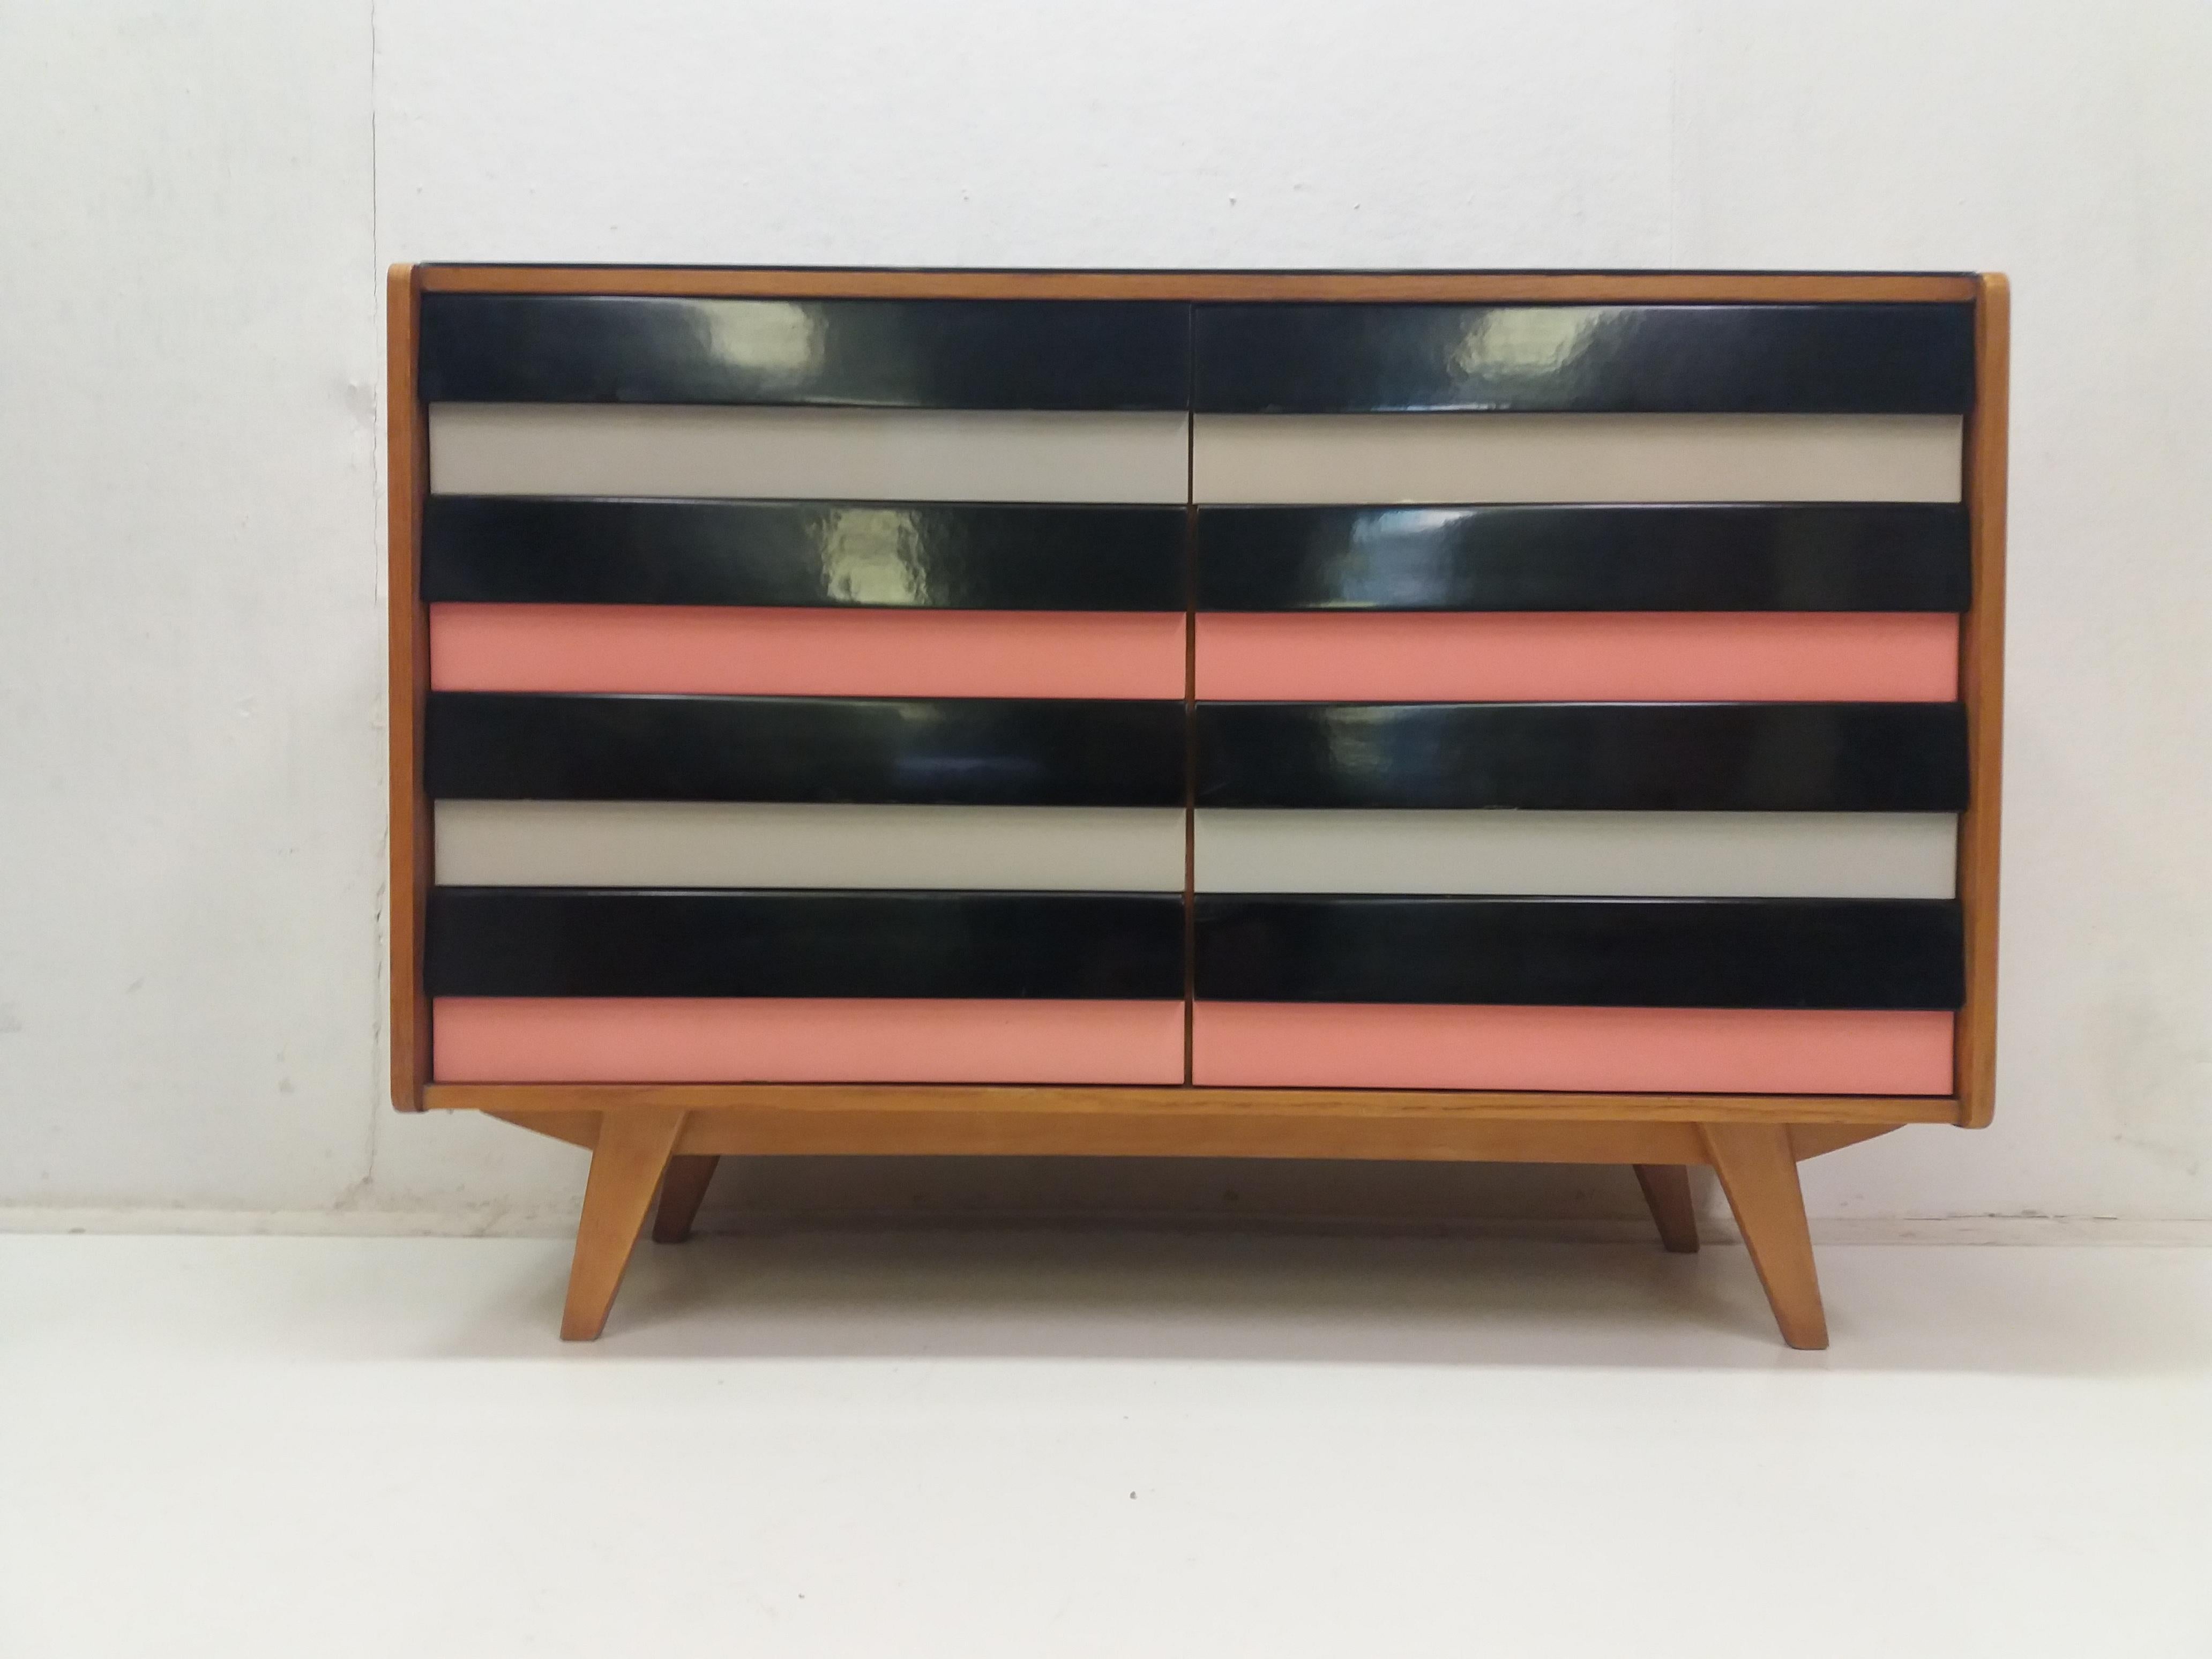 - Good original condition
- Oak veneer with eight lacquered drawers. 
- Design by Jirí Jiroutek 1958 produced by Fa Interiér Praha Czechoslovakia. 
- The upper surface is glued black glass.
 